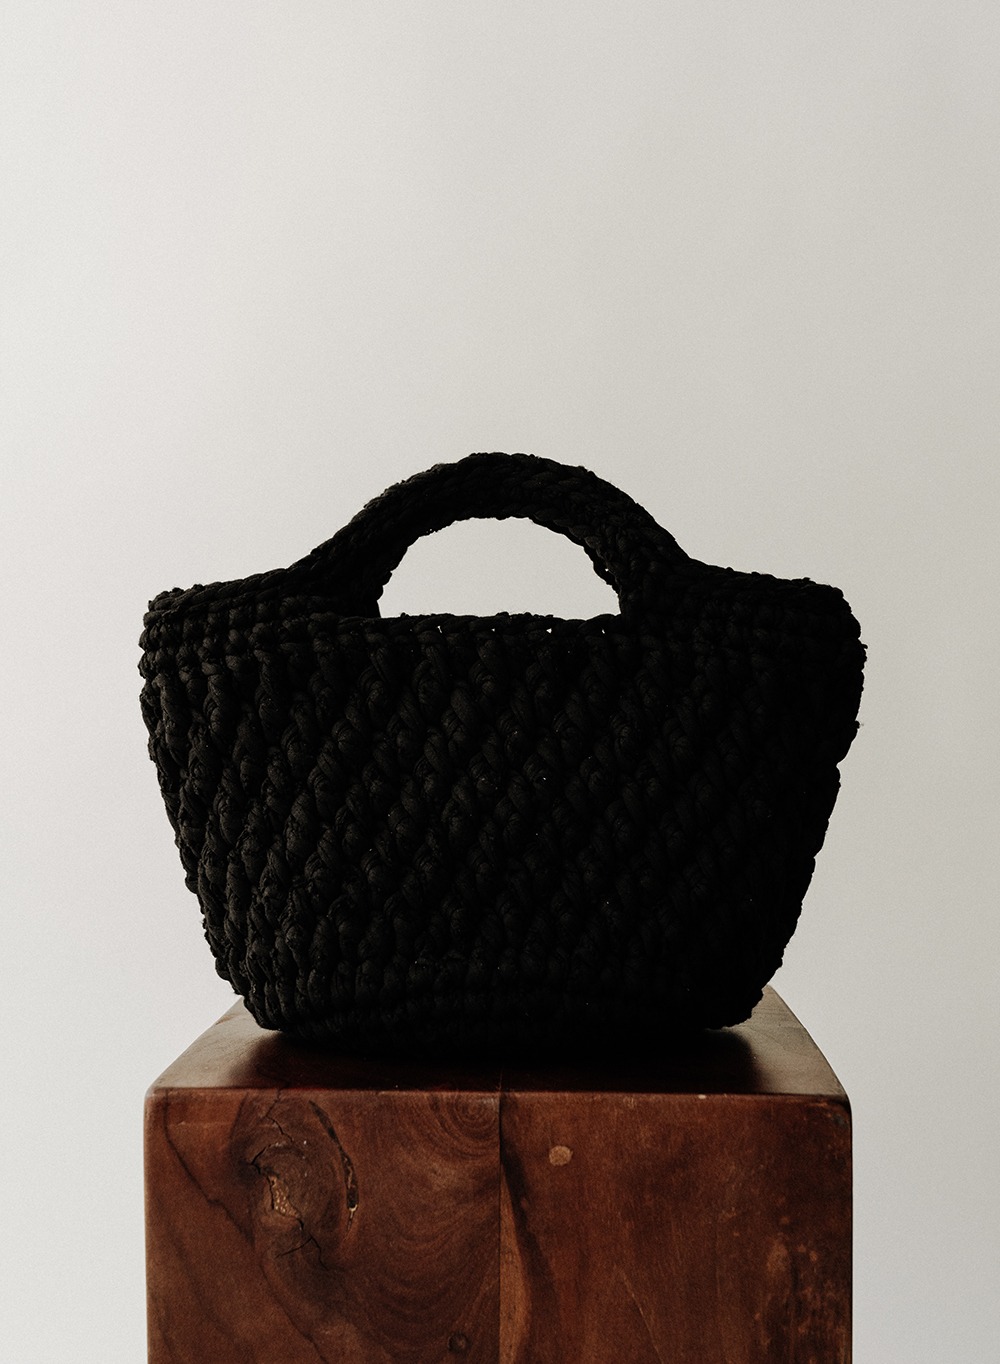 SS22 핸드메이드 Hand-made Knitted Tote Black